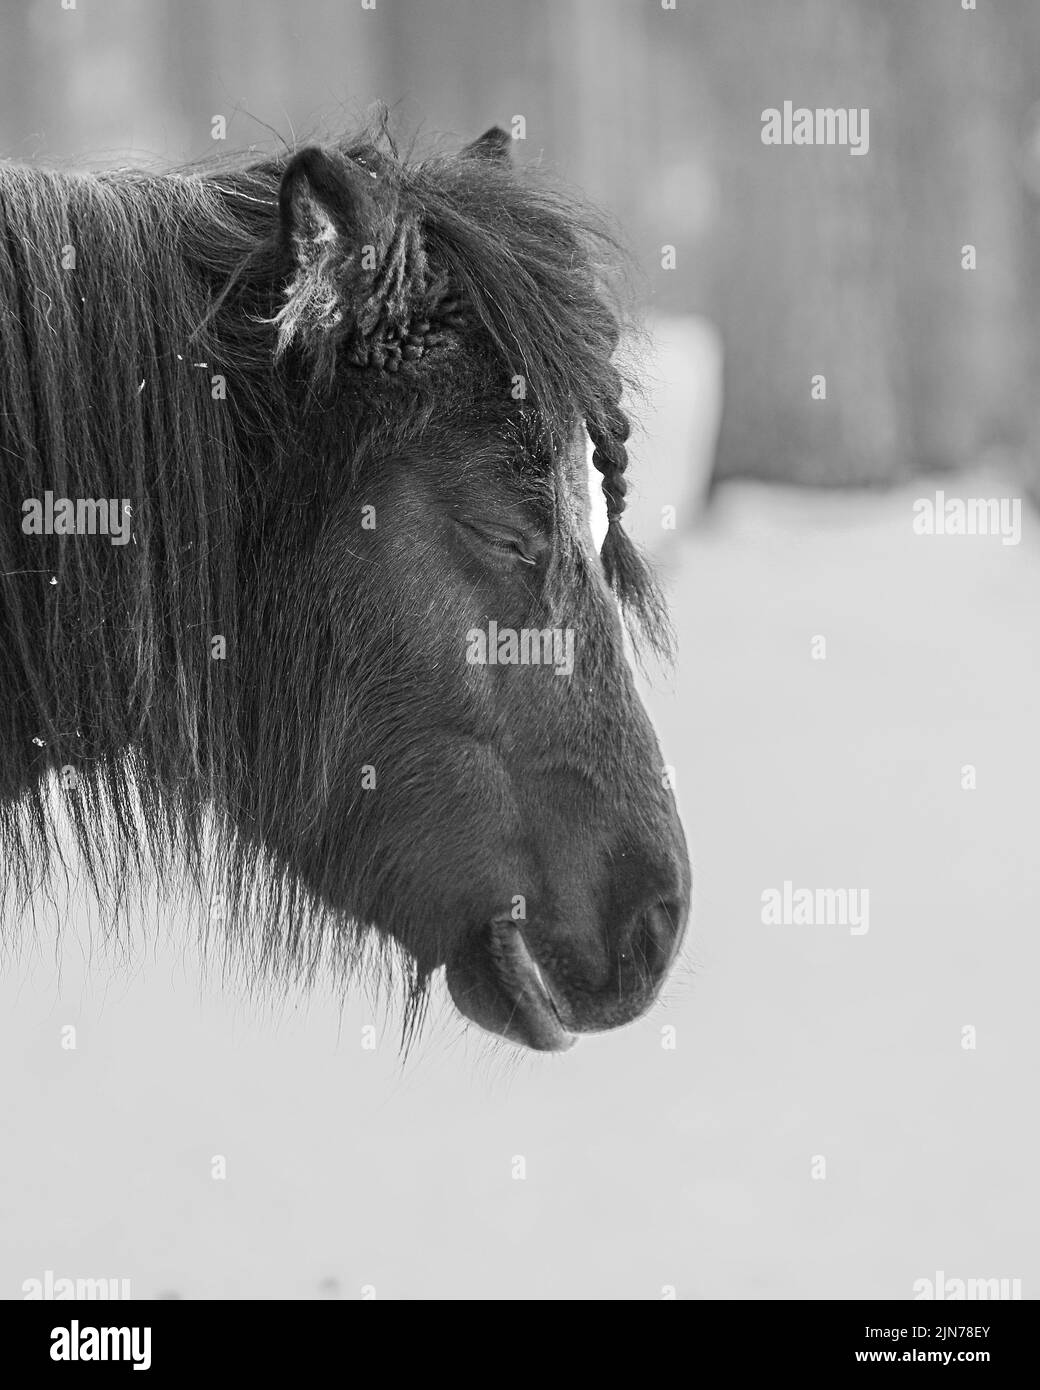 A closeup shot of a head of a horse with adorable braided bangs Stock Photo